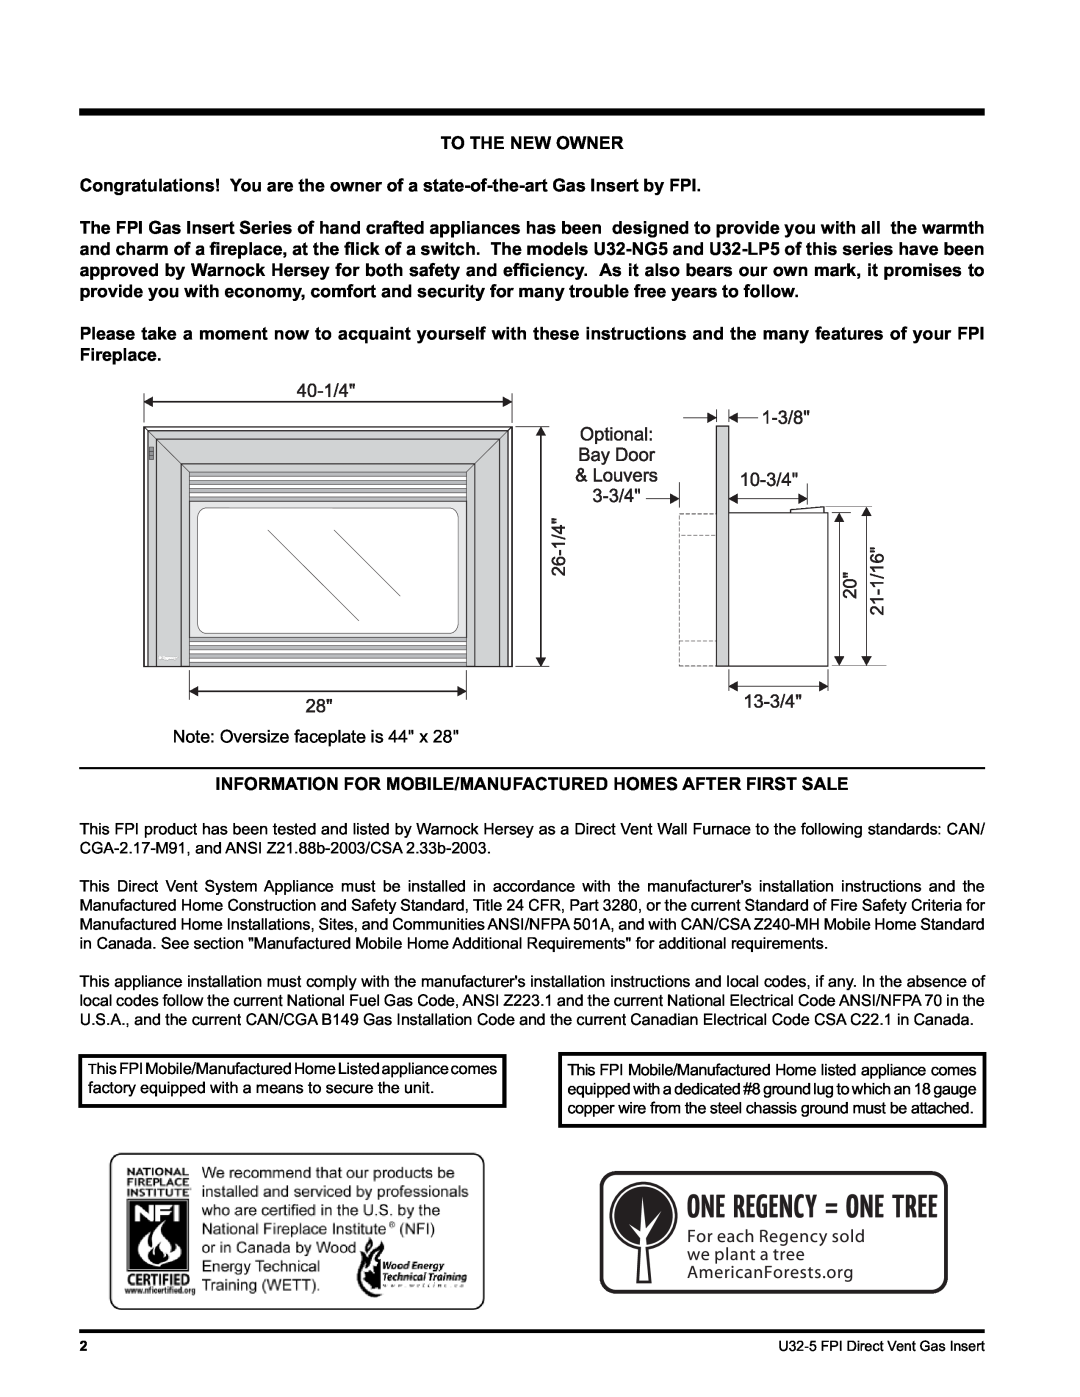 Hampton Direct U32 installation manual To The New Owner 